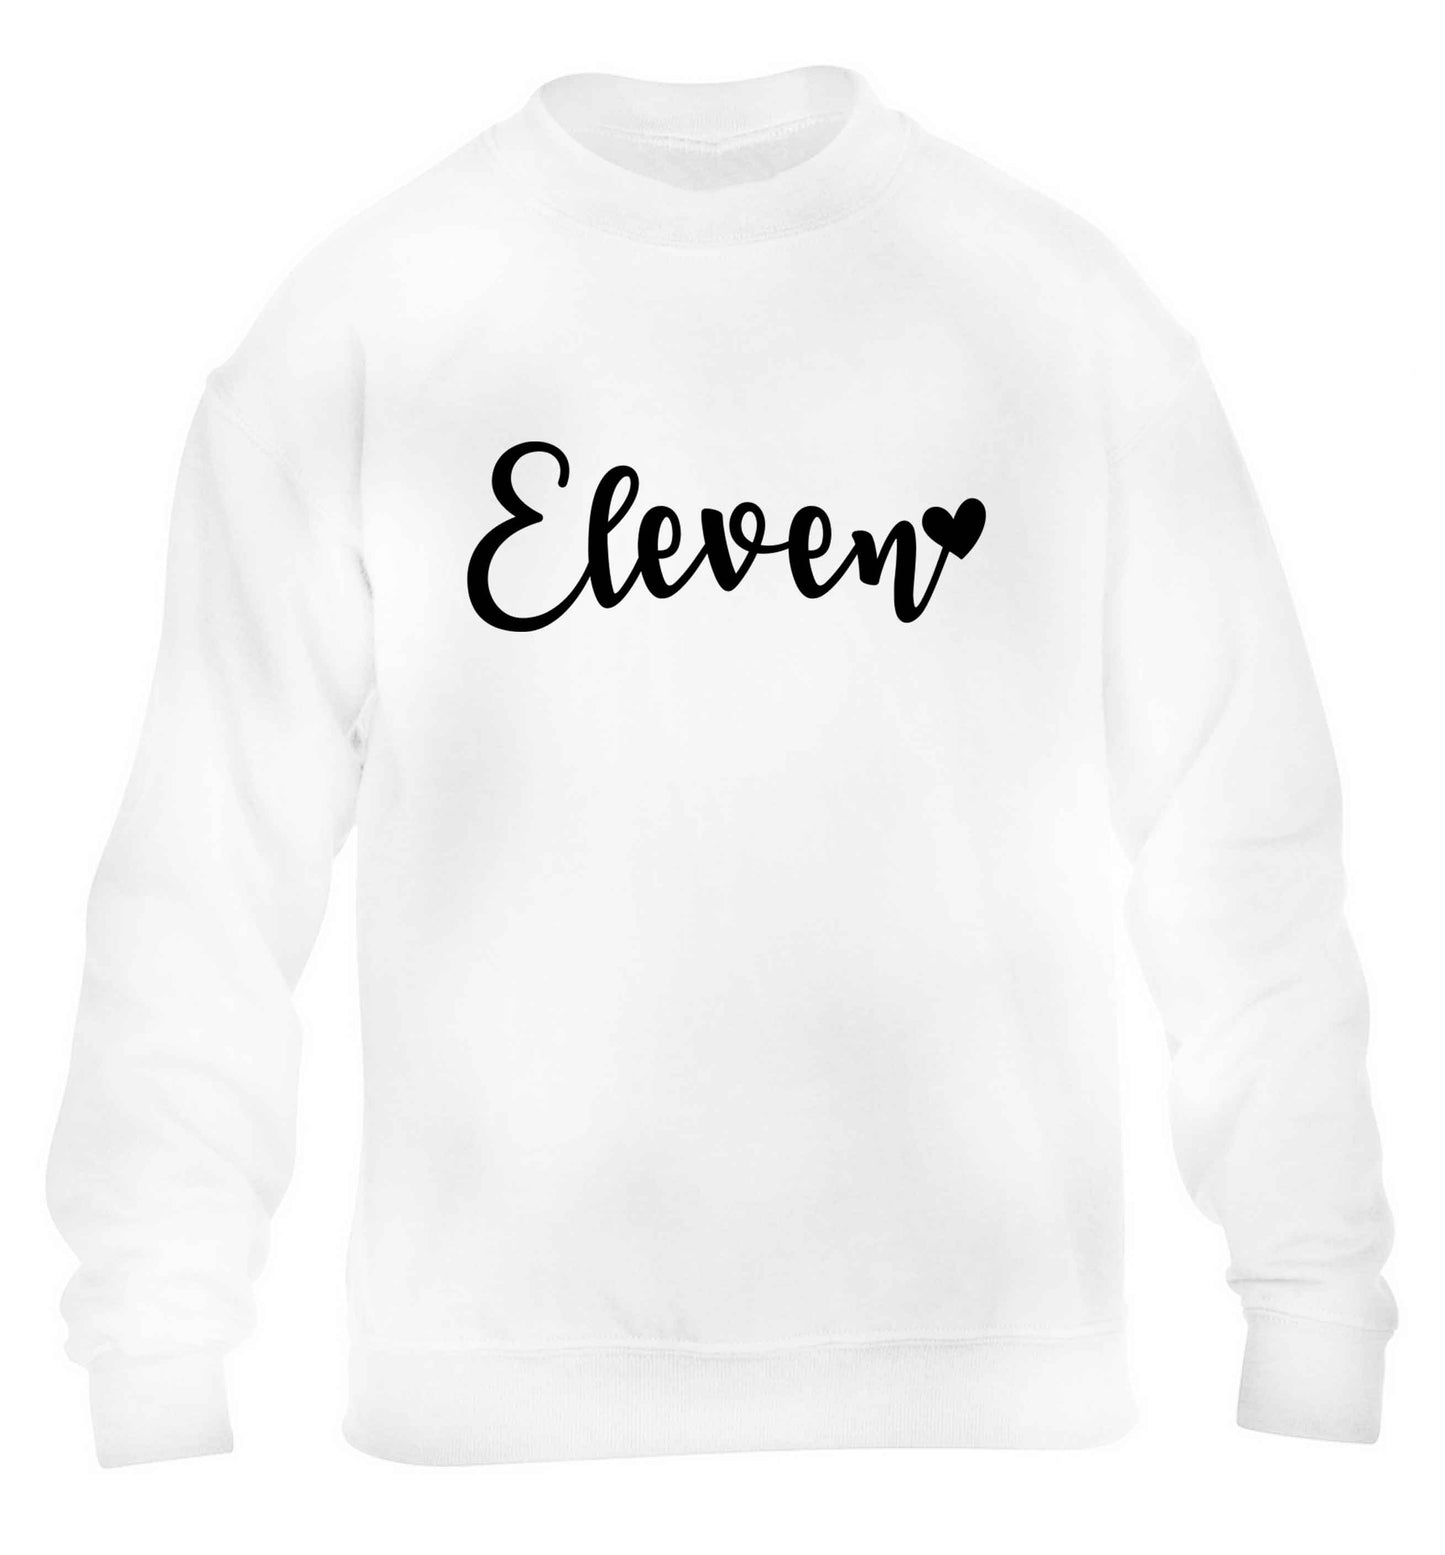 Eleven and heart! children's white sweater 12-13 Years